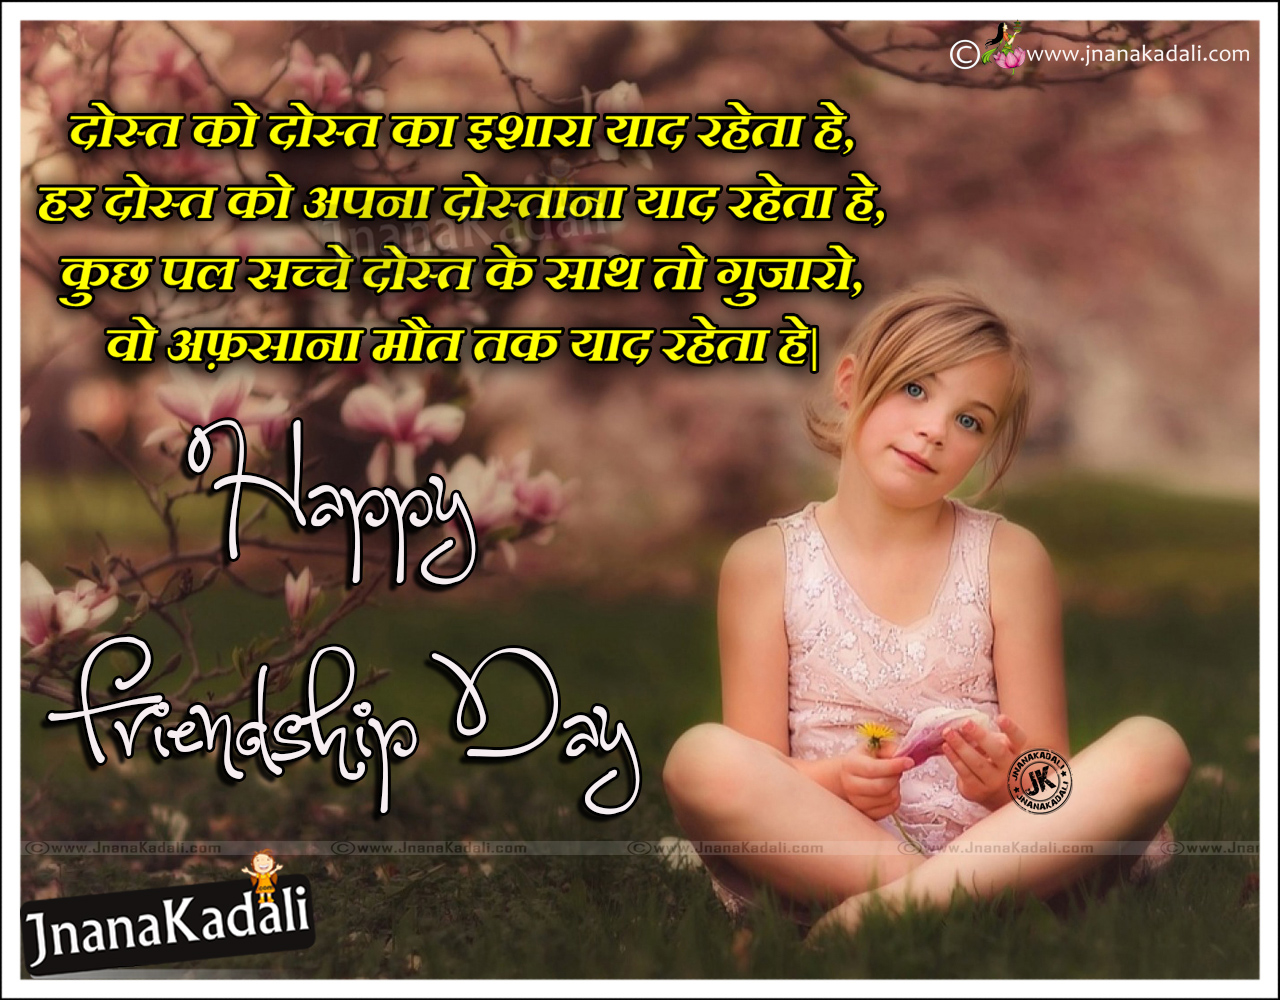 Whats App Status international Friendship day Wishes Quotes Hd ...